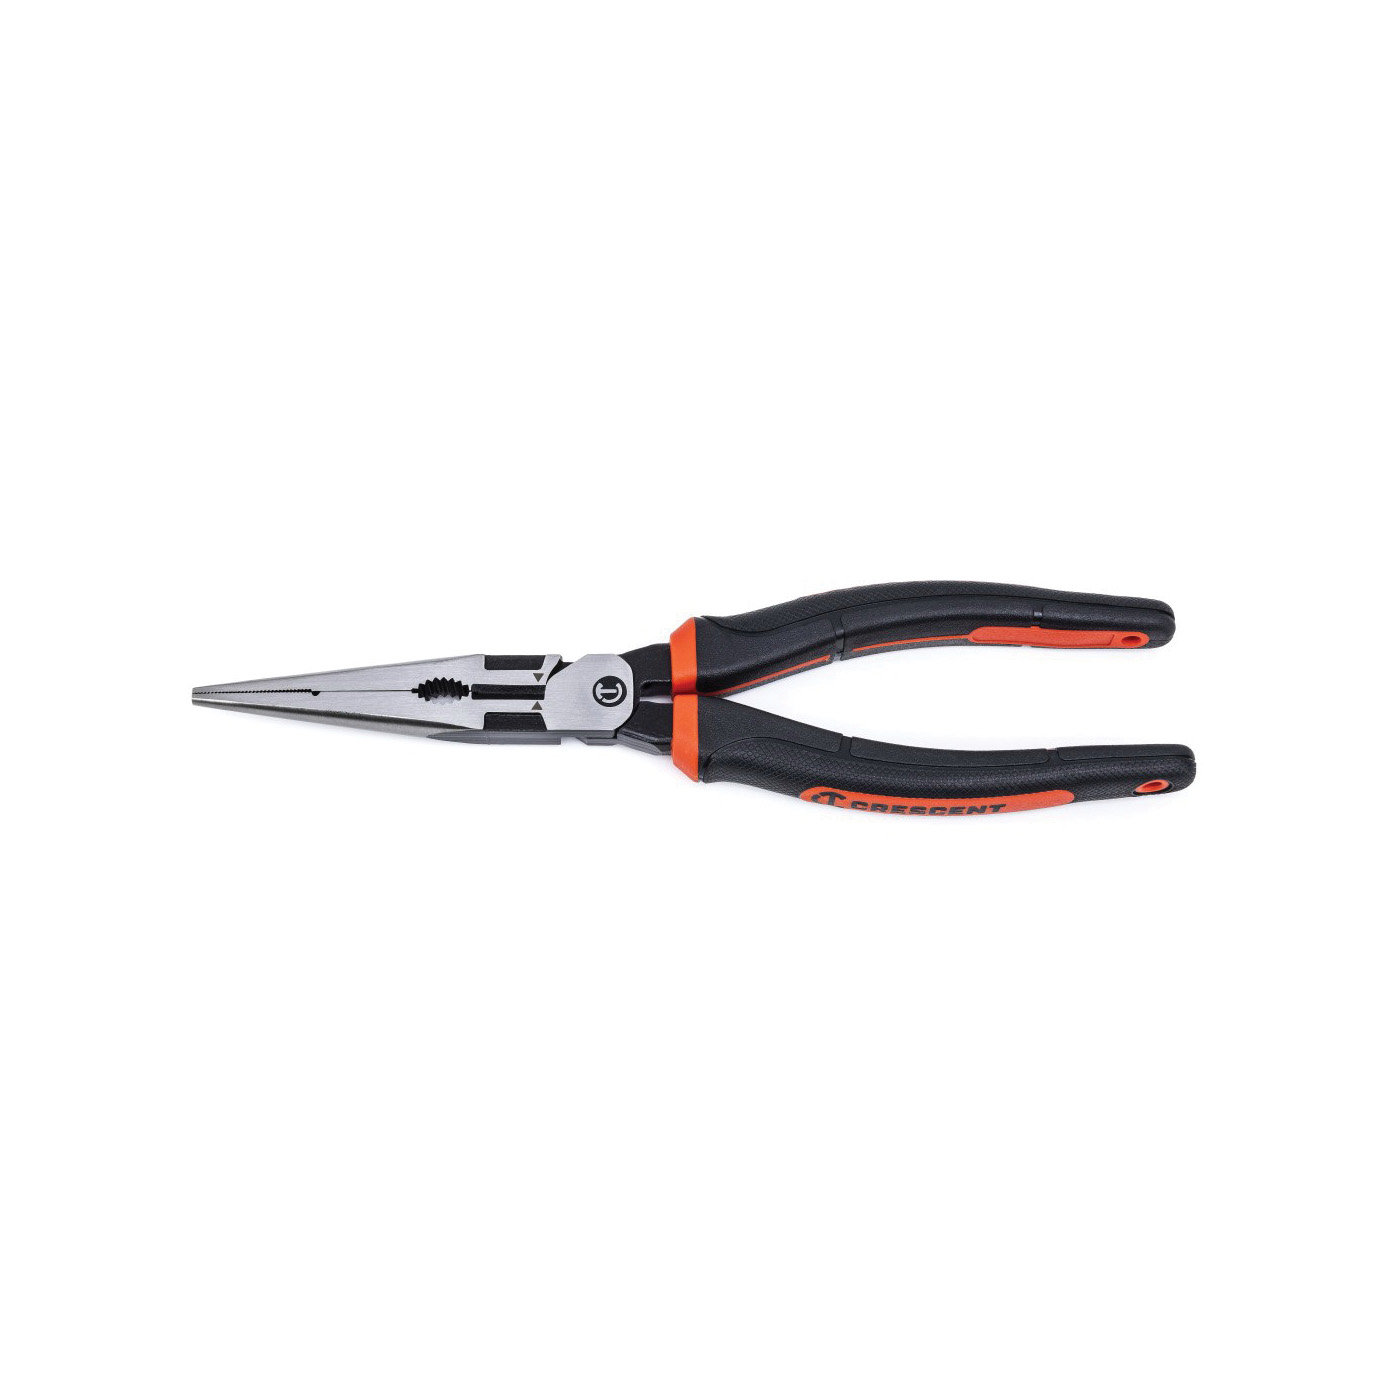 Crescent Z2 K9 Series Z6546CG Plier, 6.6 in OAL, 11 AWG Cutting Capacity, 1-1/2 in Jaw Opening, Black/Rawhide Handle